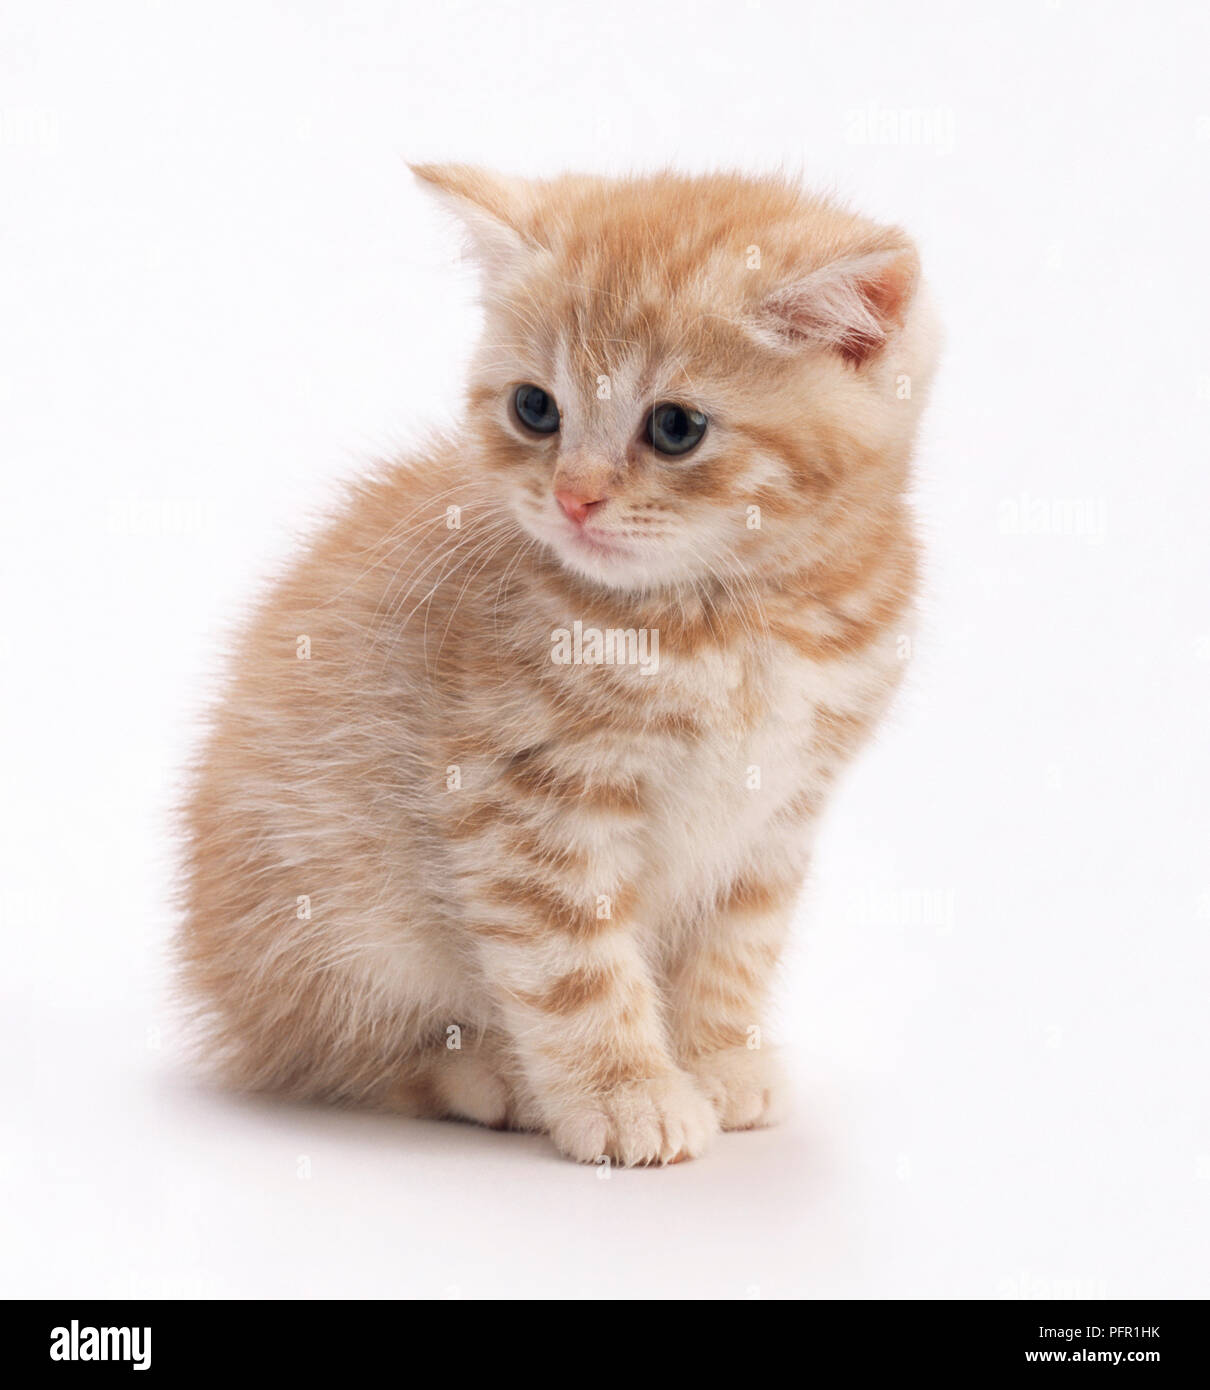 Ginger tabby kitten, looking away Banque D'Images